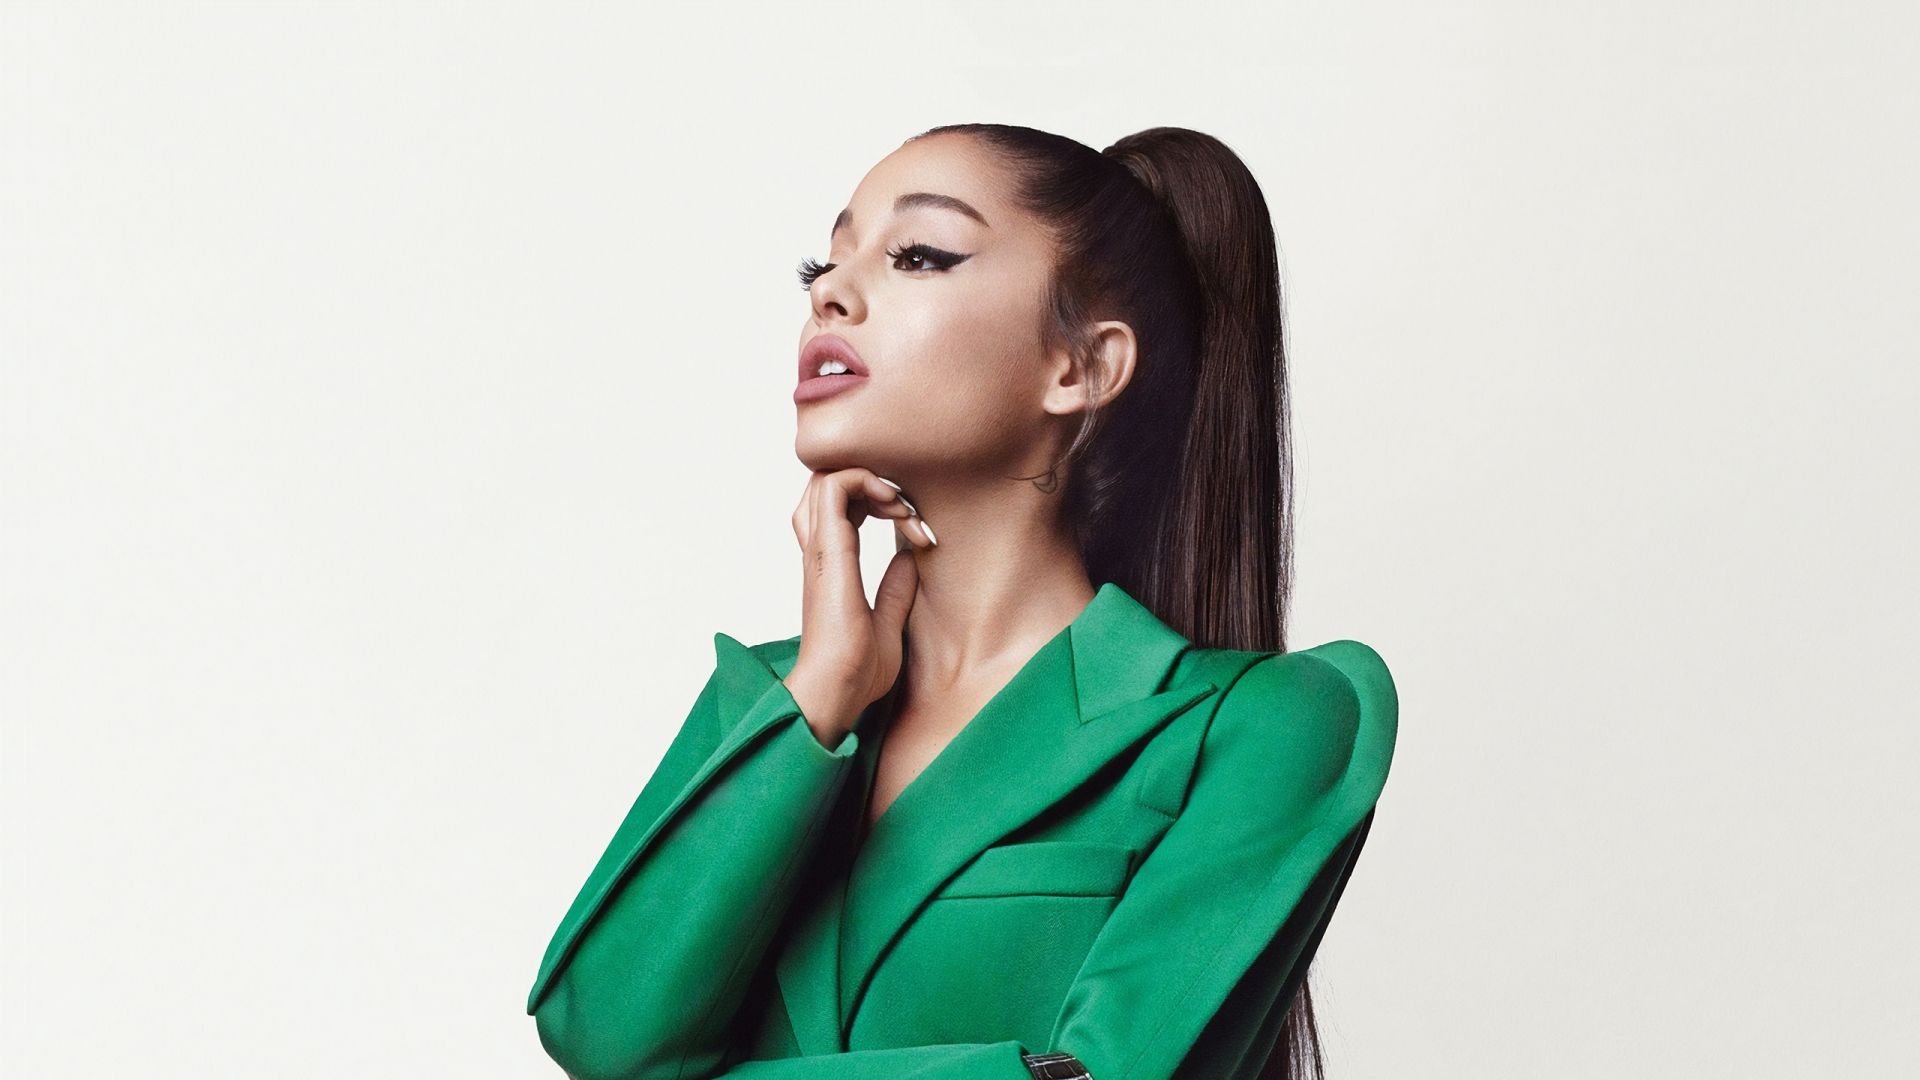 Desktop wallpaper ariana grande, givenchy campaign, HD image, picture, background, 65531c